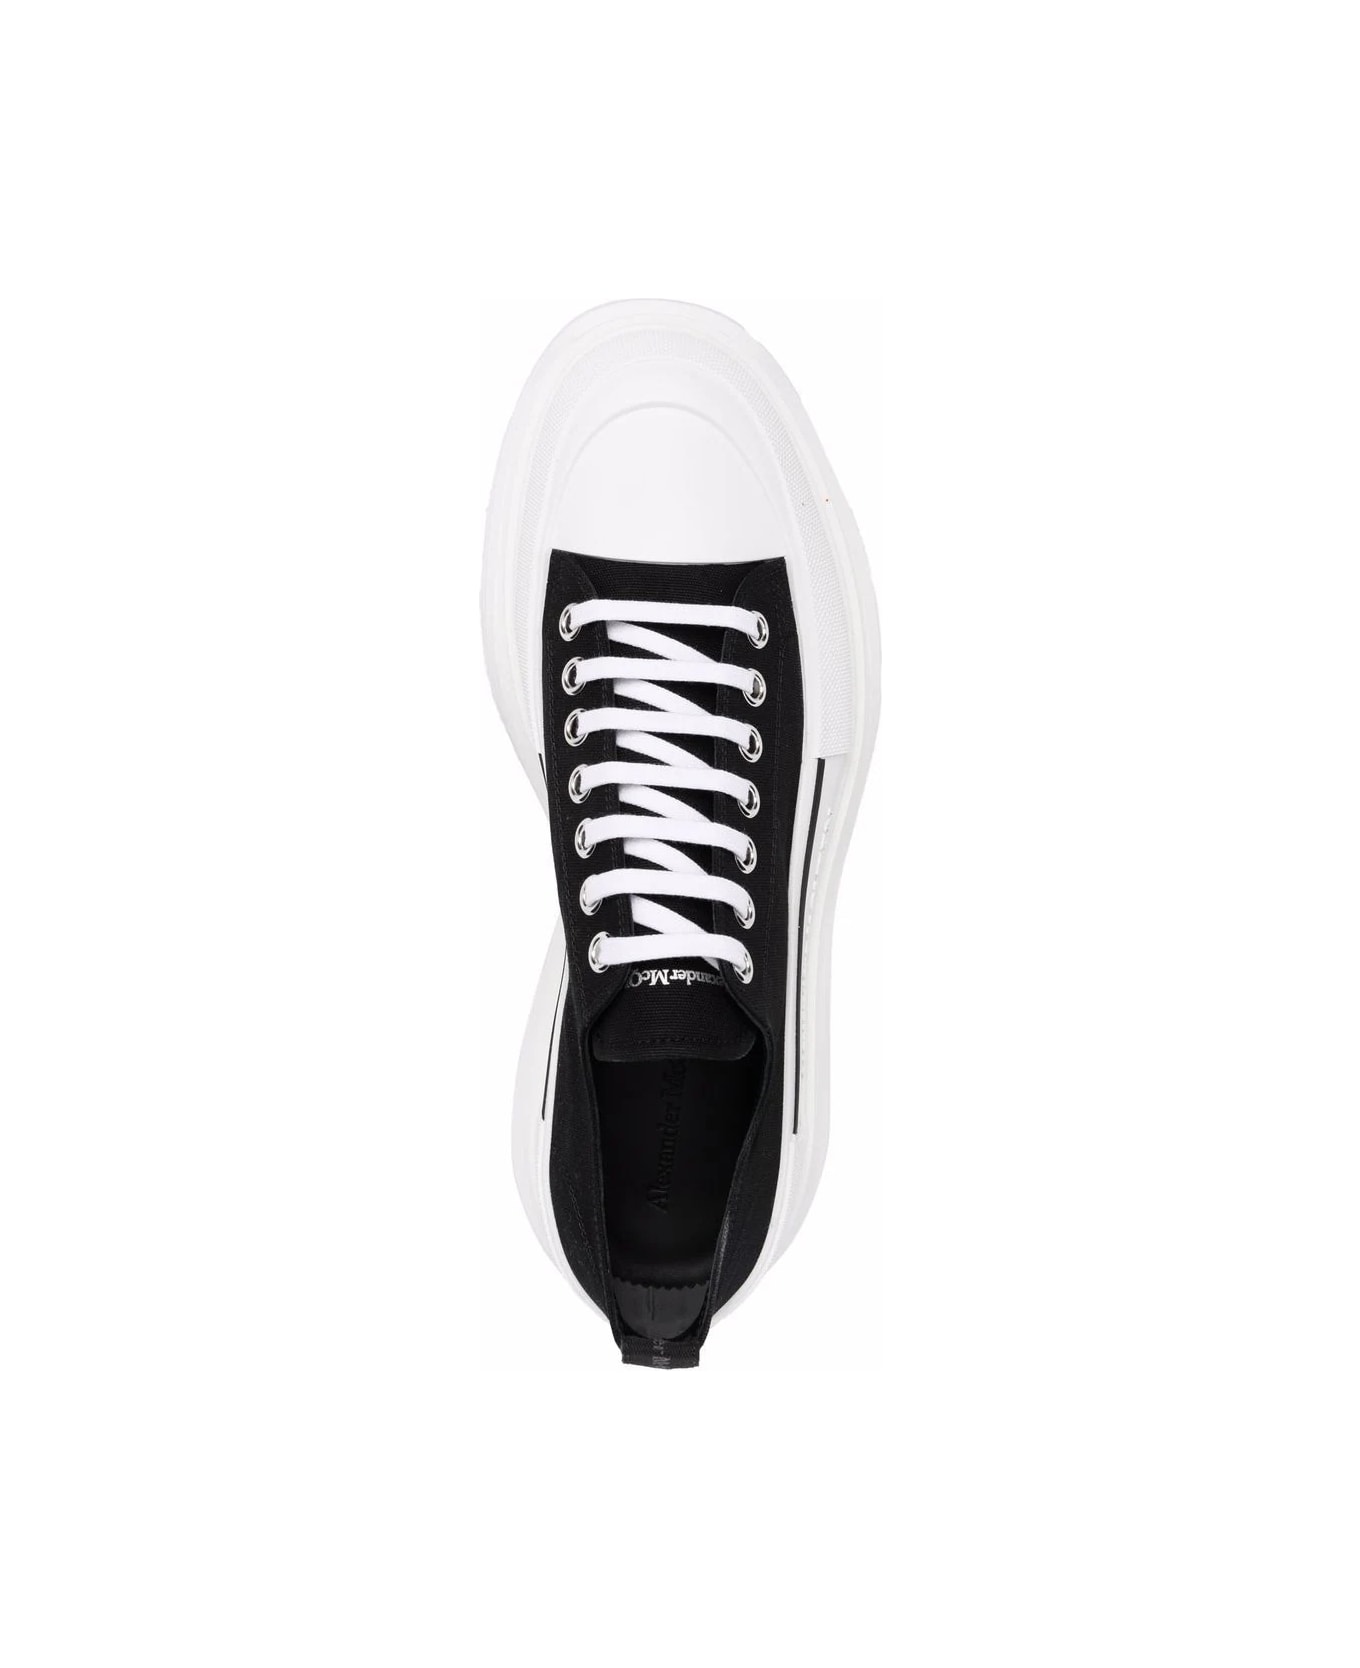 Alexander McQueen Tread Slick Lace Up Shoes In Black And White - Black